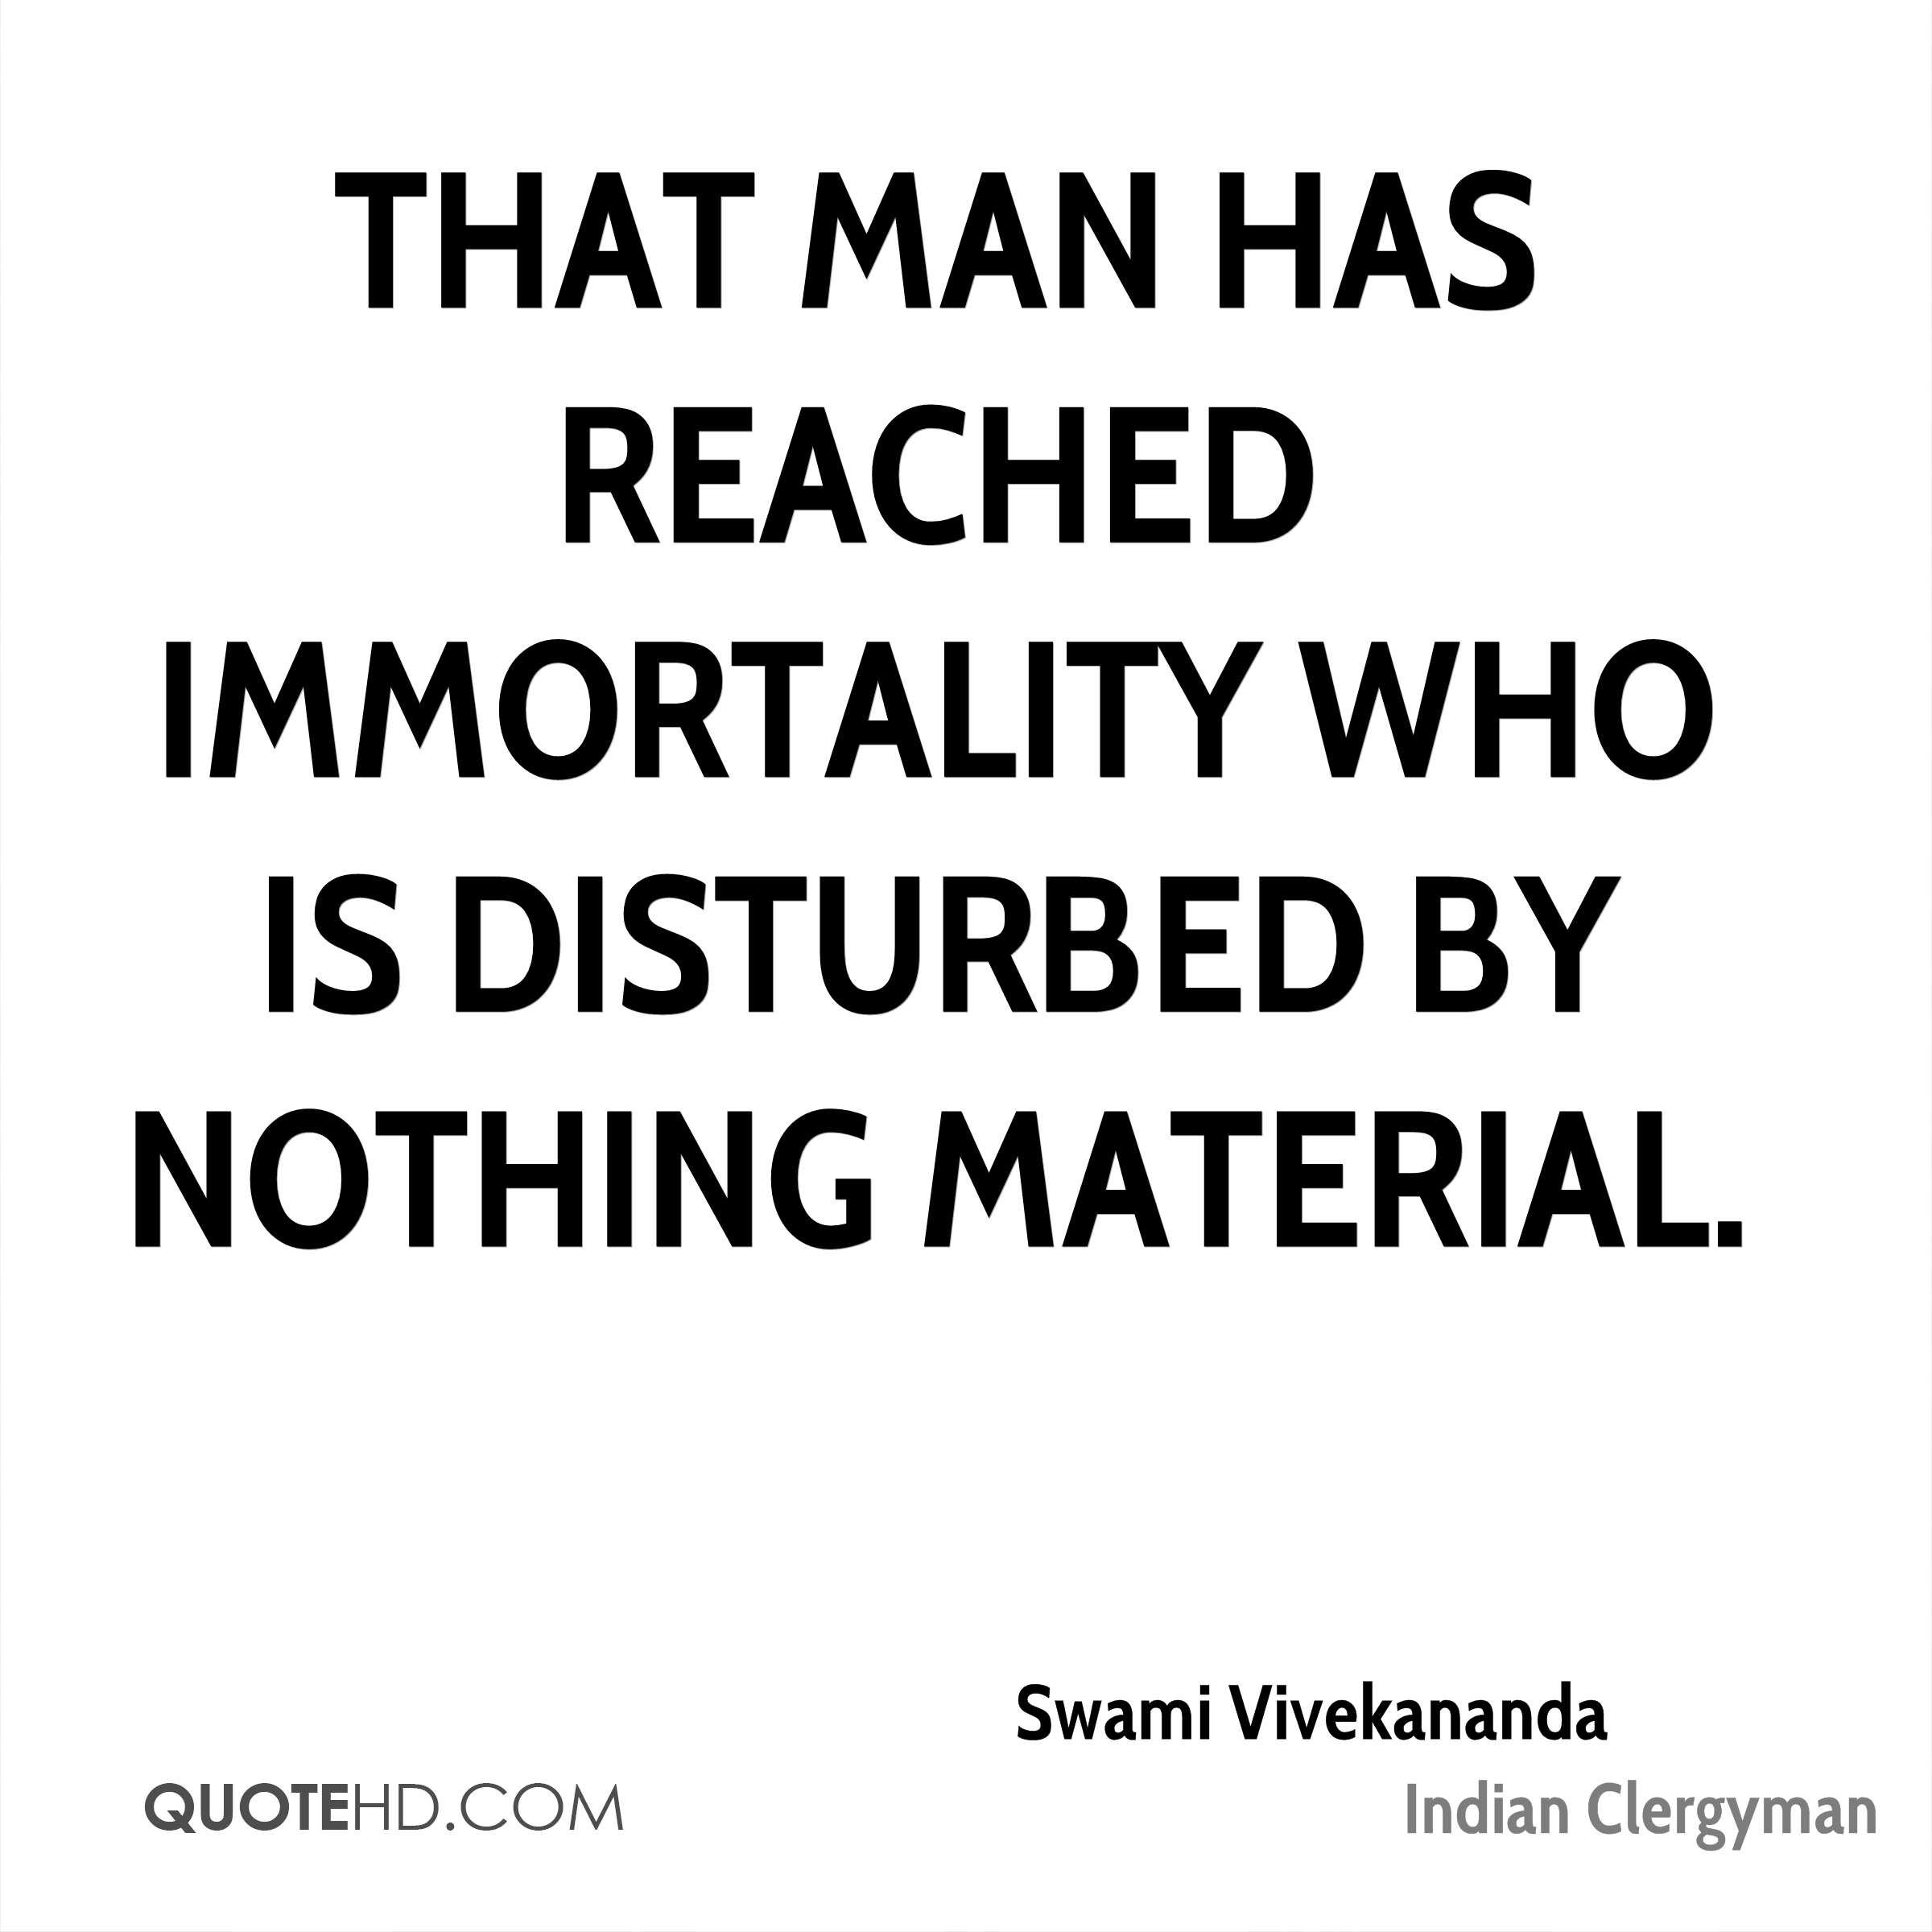 That man has reached immortality who is disturbed by nothing material Swami Vivekananda